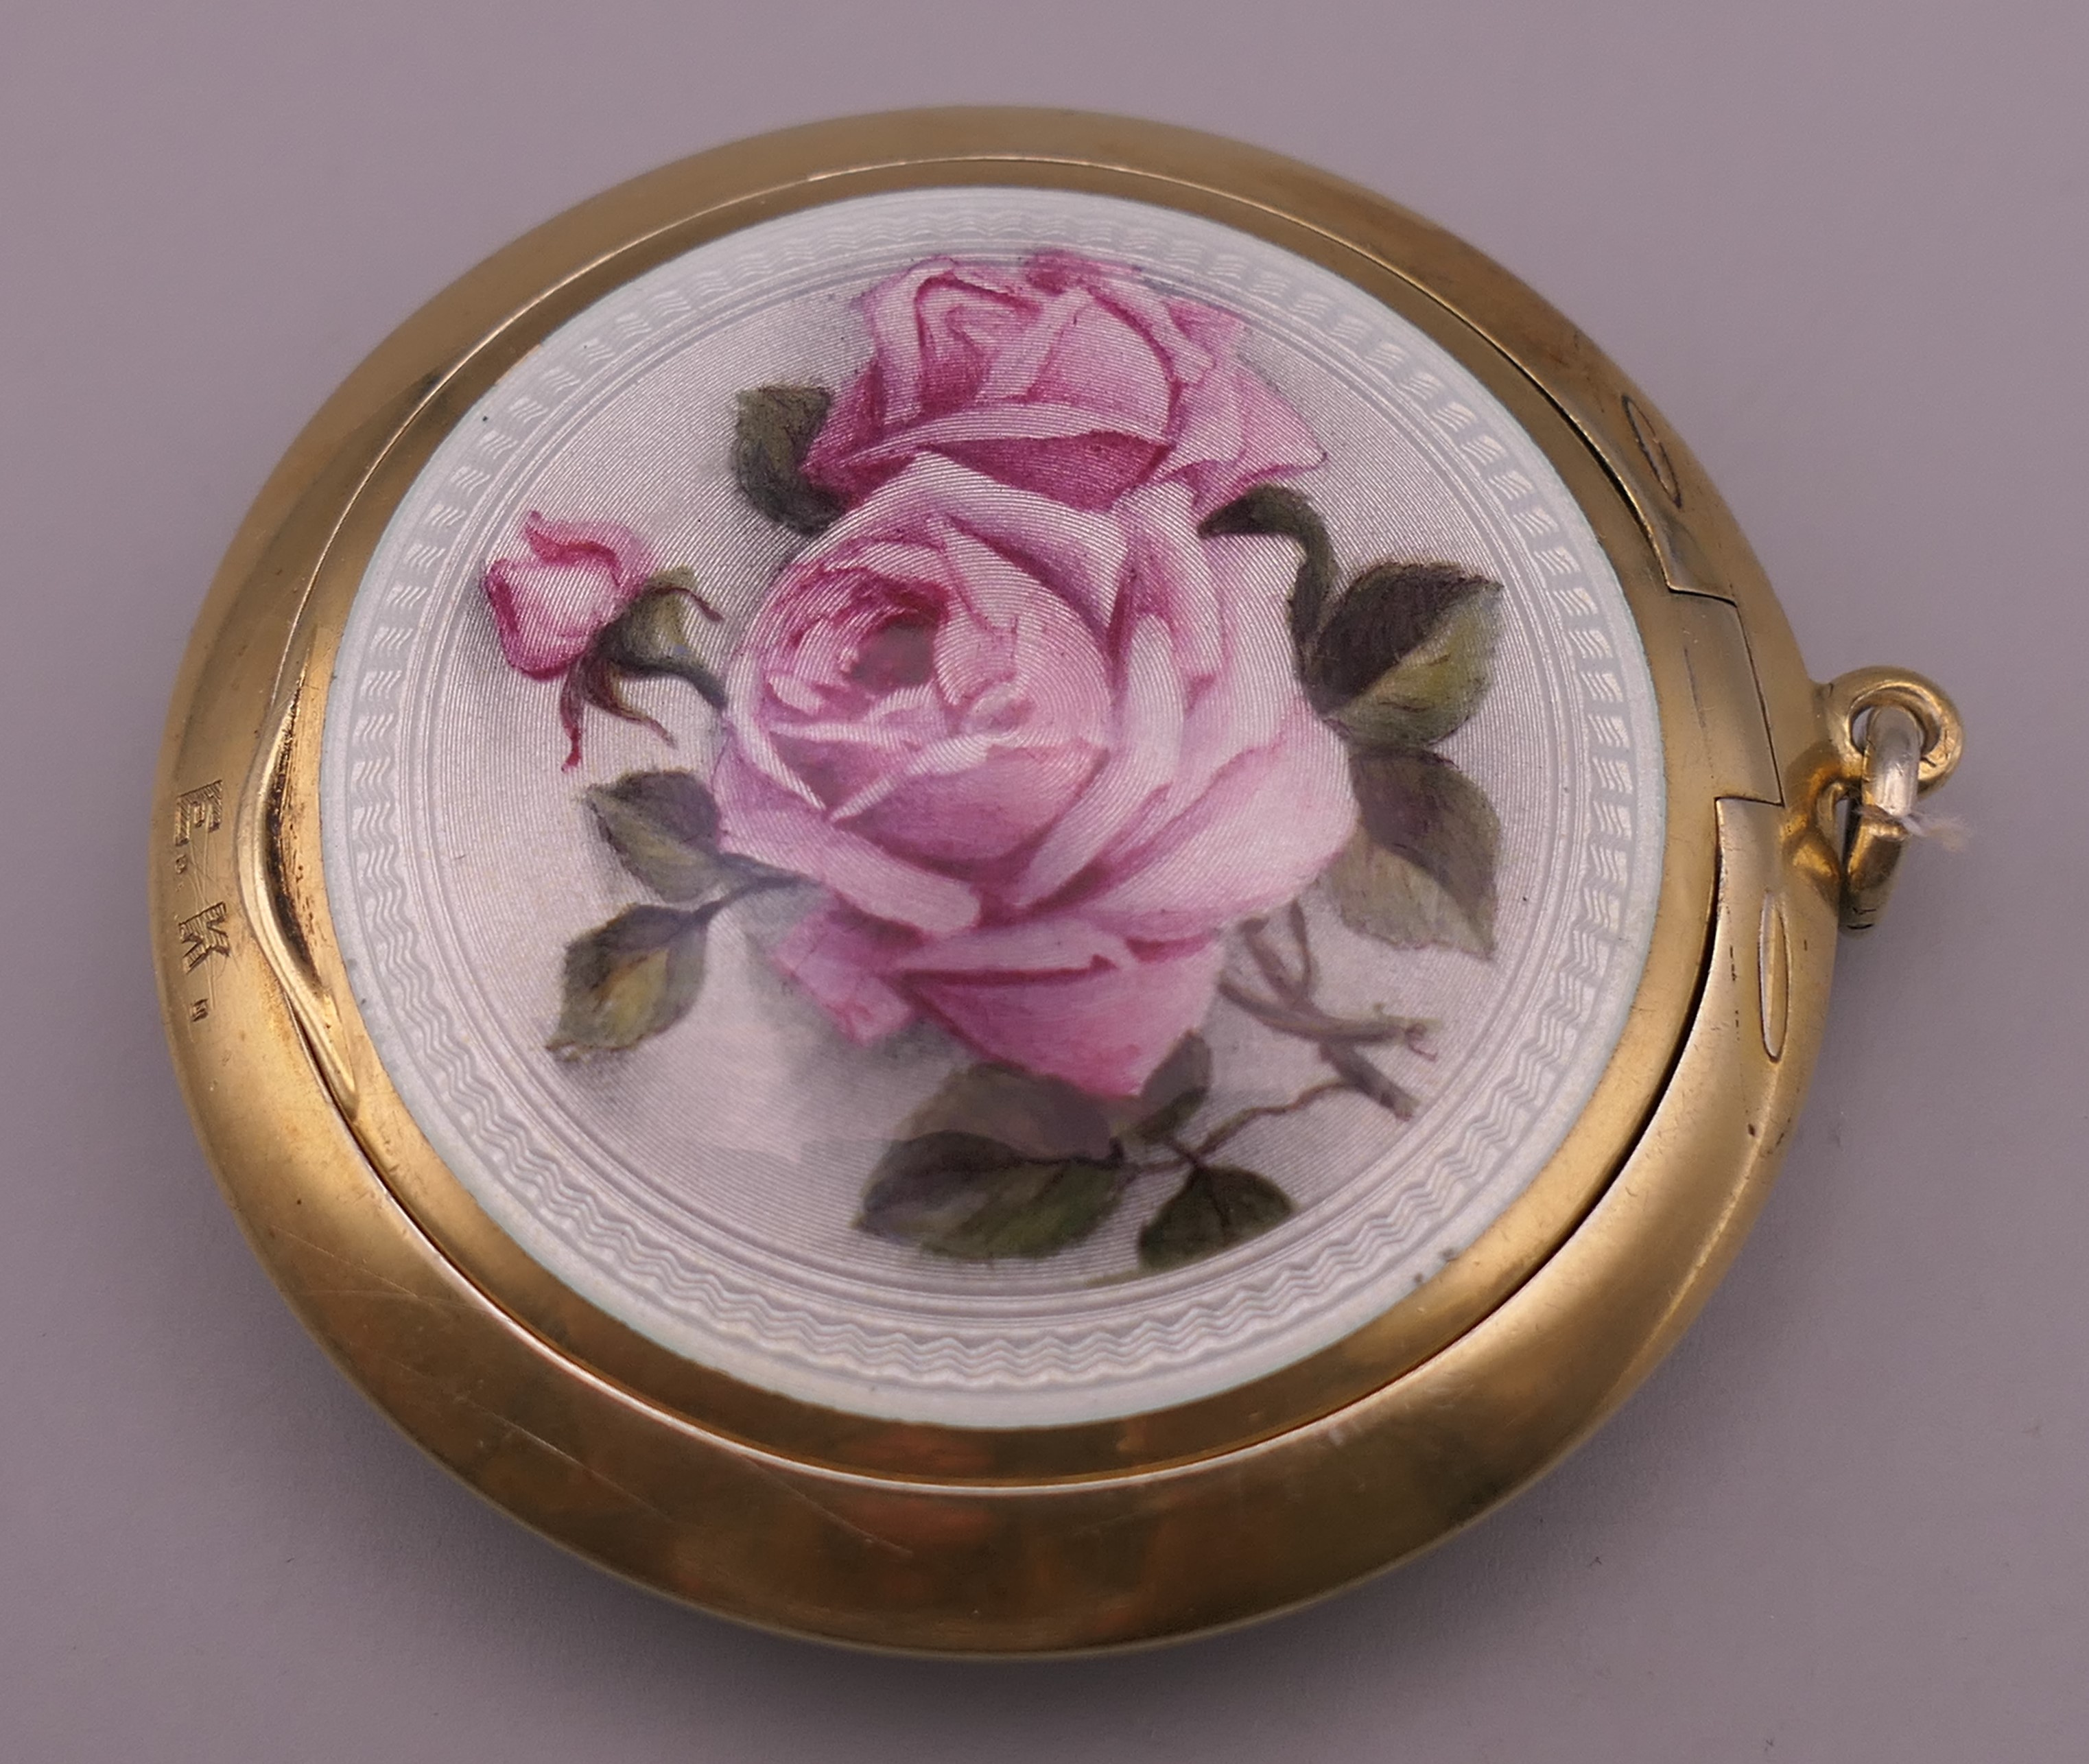 A 925 silver gilt and enamel decorated compact. 5.5 cm diameter.